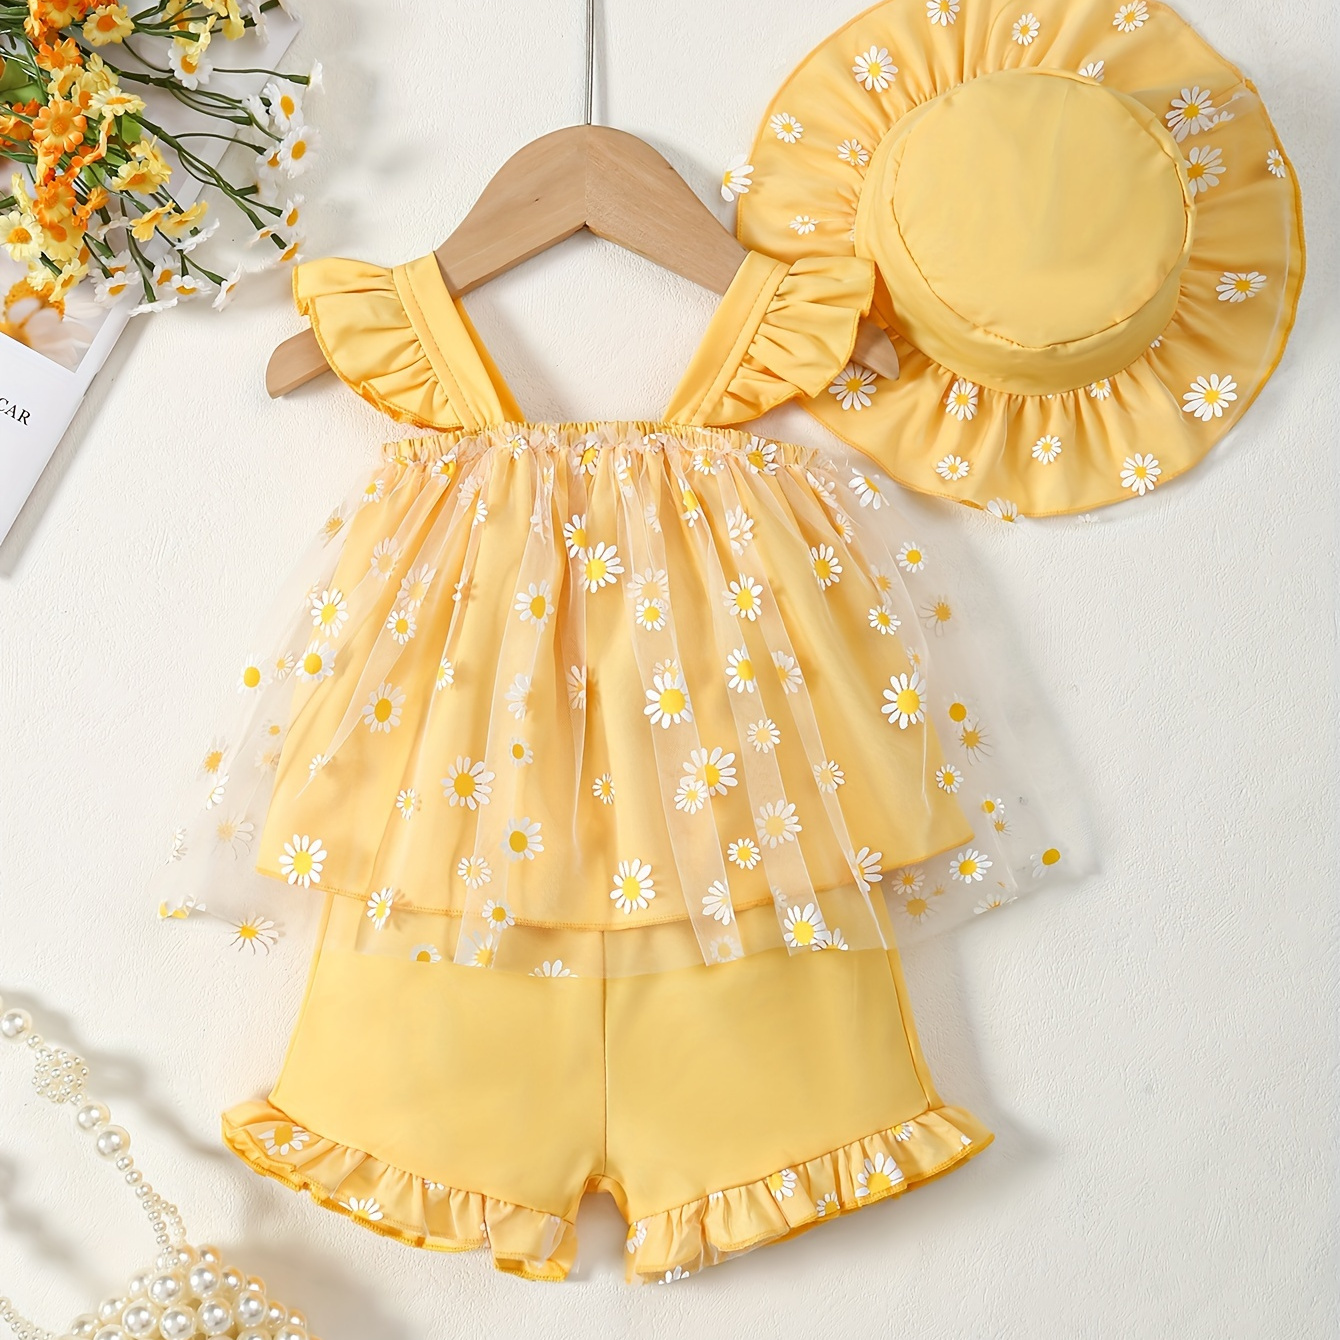 

Baby's Cartoon Daisy Print 2pcs Lovely Summer Outfit, Mesh Splicing Sleeveless Top & Hat & Ruffle Trim Shorts Set, Toddler & Infant Girl's Clothes For Daily/holiday, As Gift